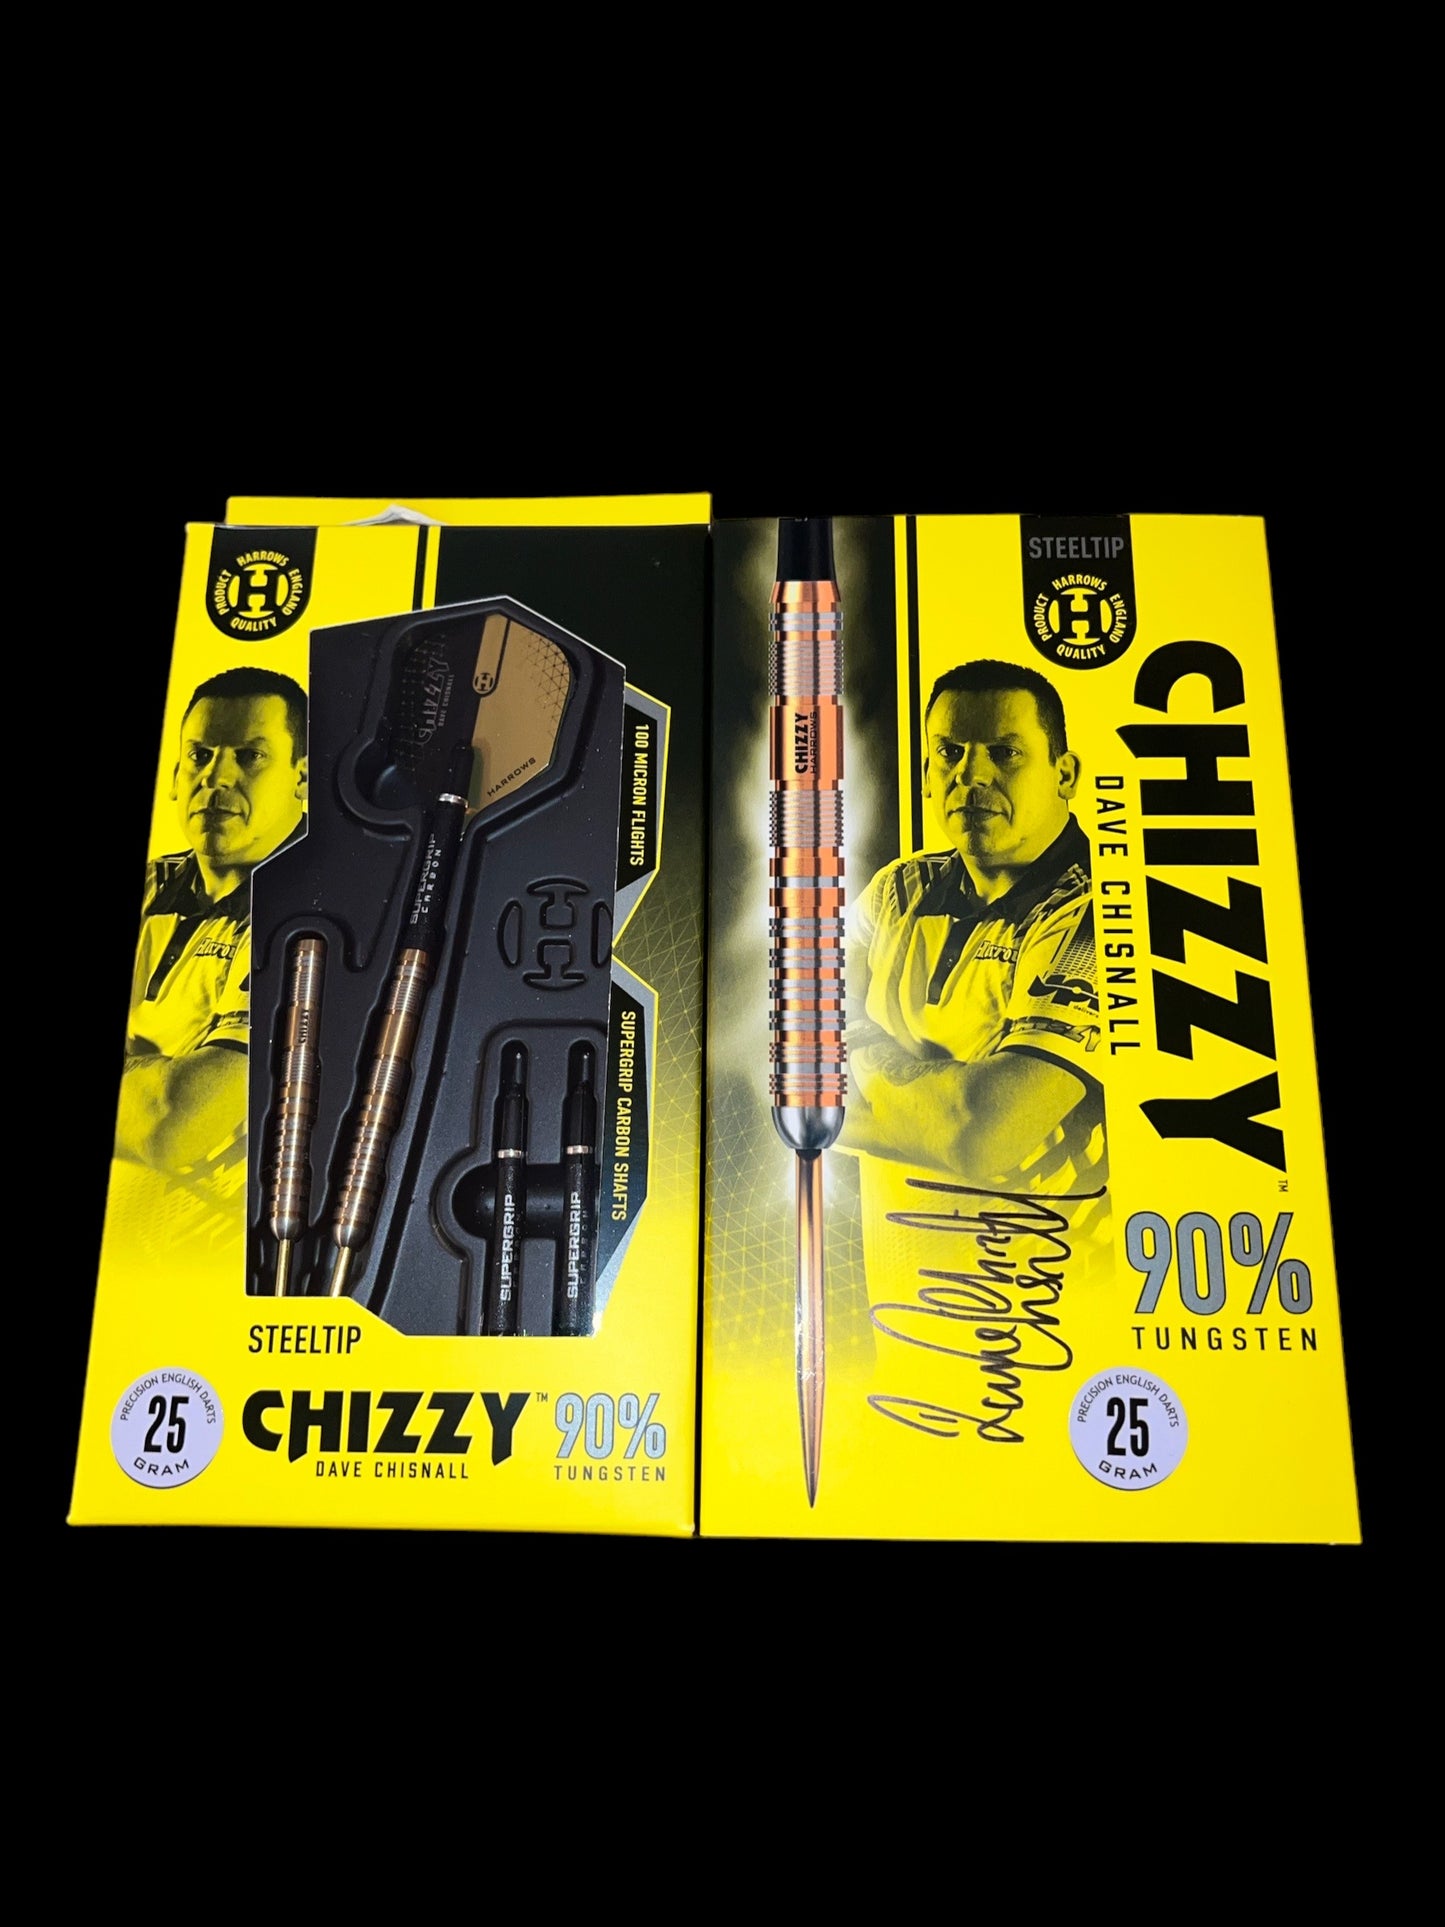 Dave Chisnall ‘Chizzy’ signed Target Darts 25 gram